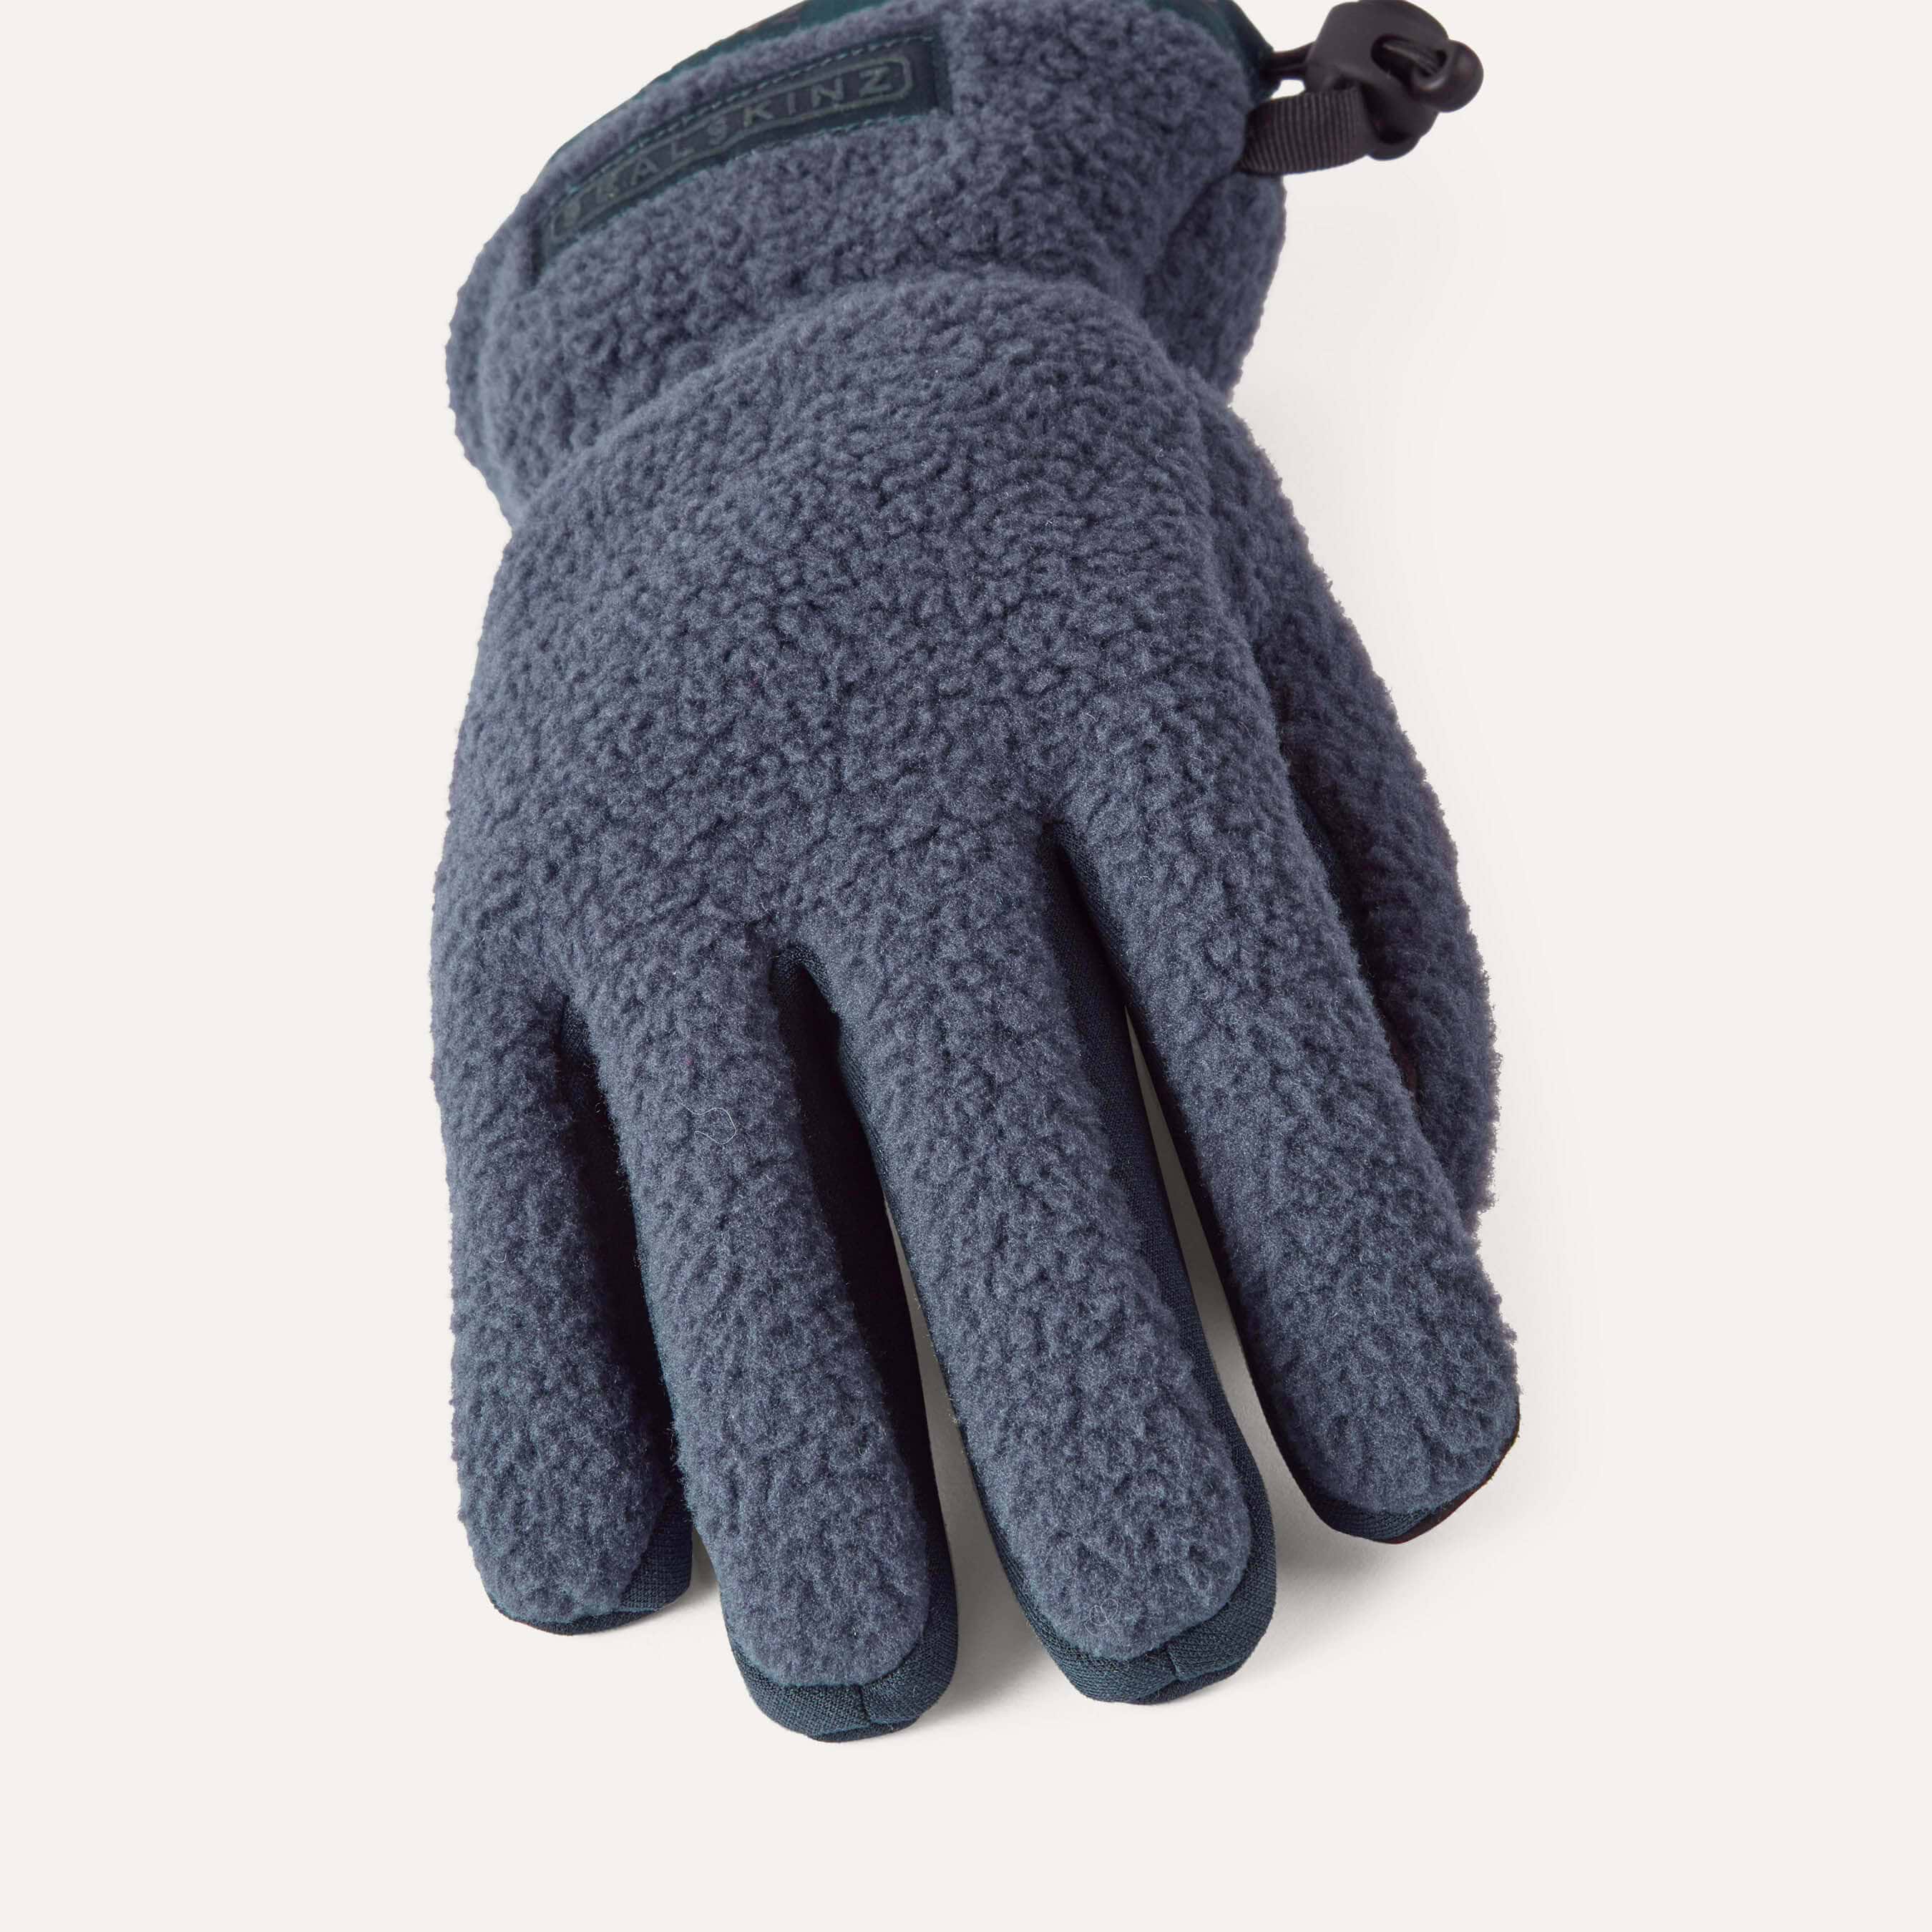 Winter Leather Work Gloves Sherpa Fleece Lined In Mens  Small,Med,Large,XL,XXL (XXL)